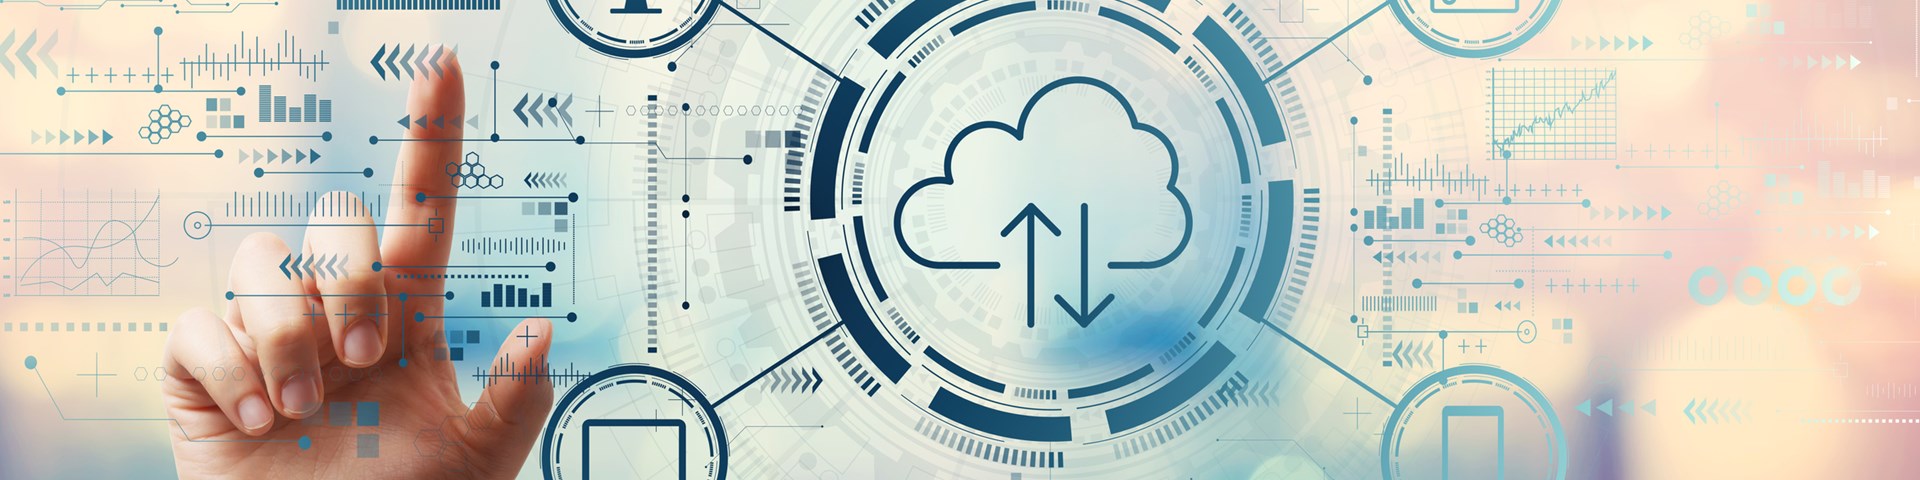 Cyber image of cloud icon showing data and laptops